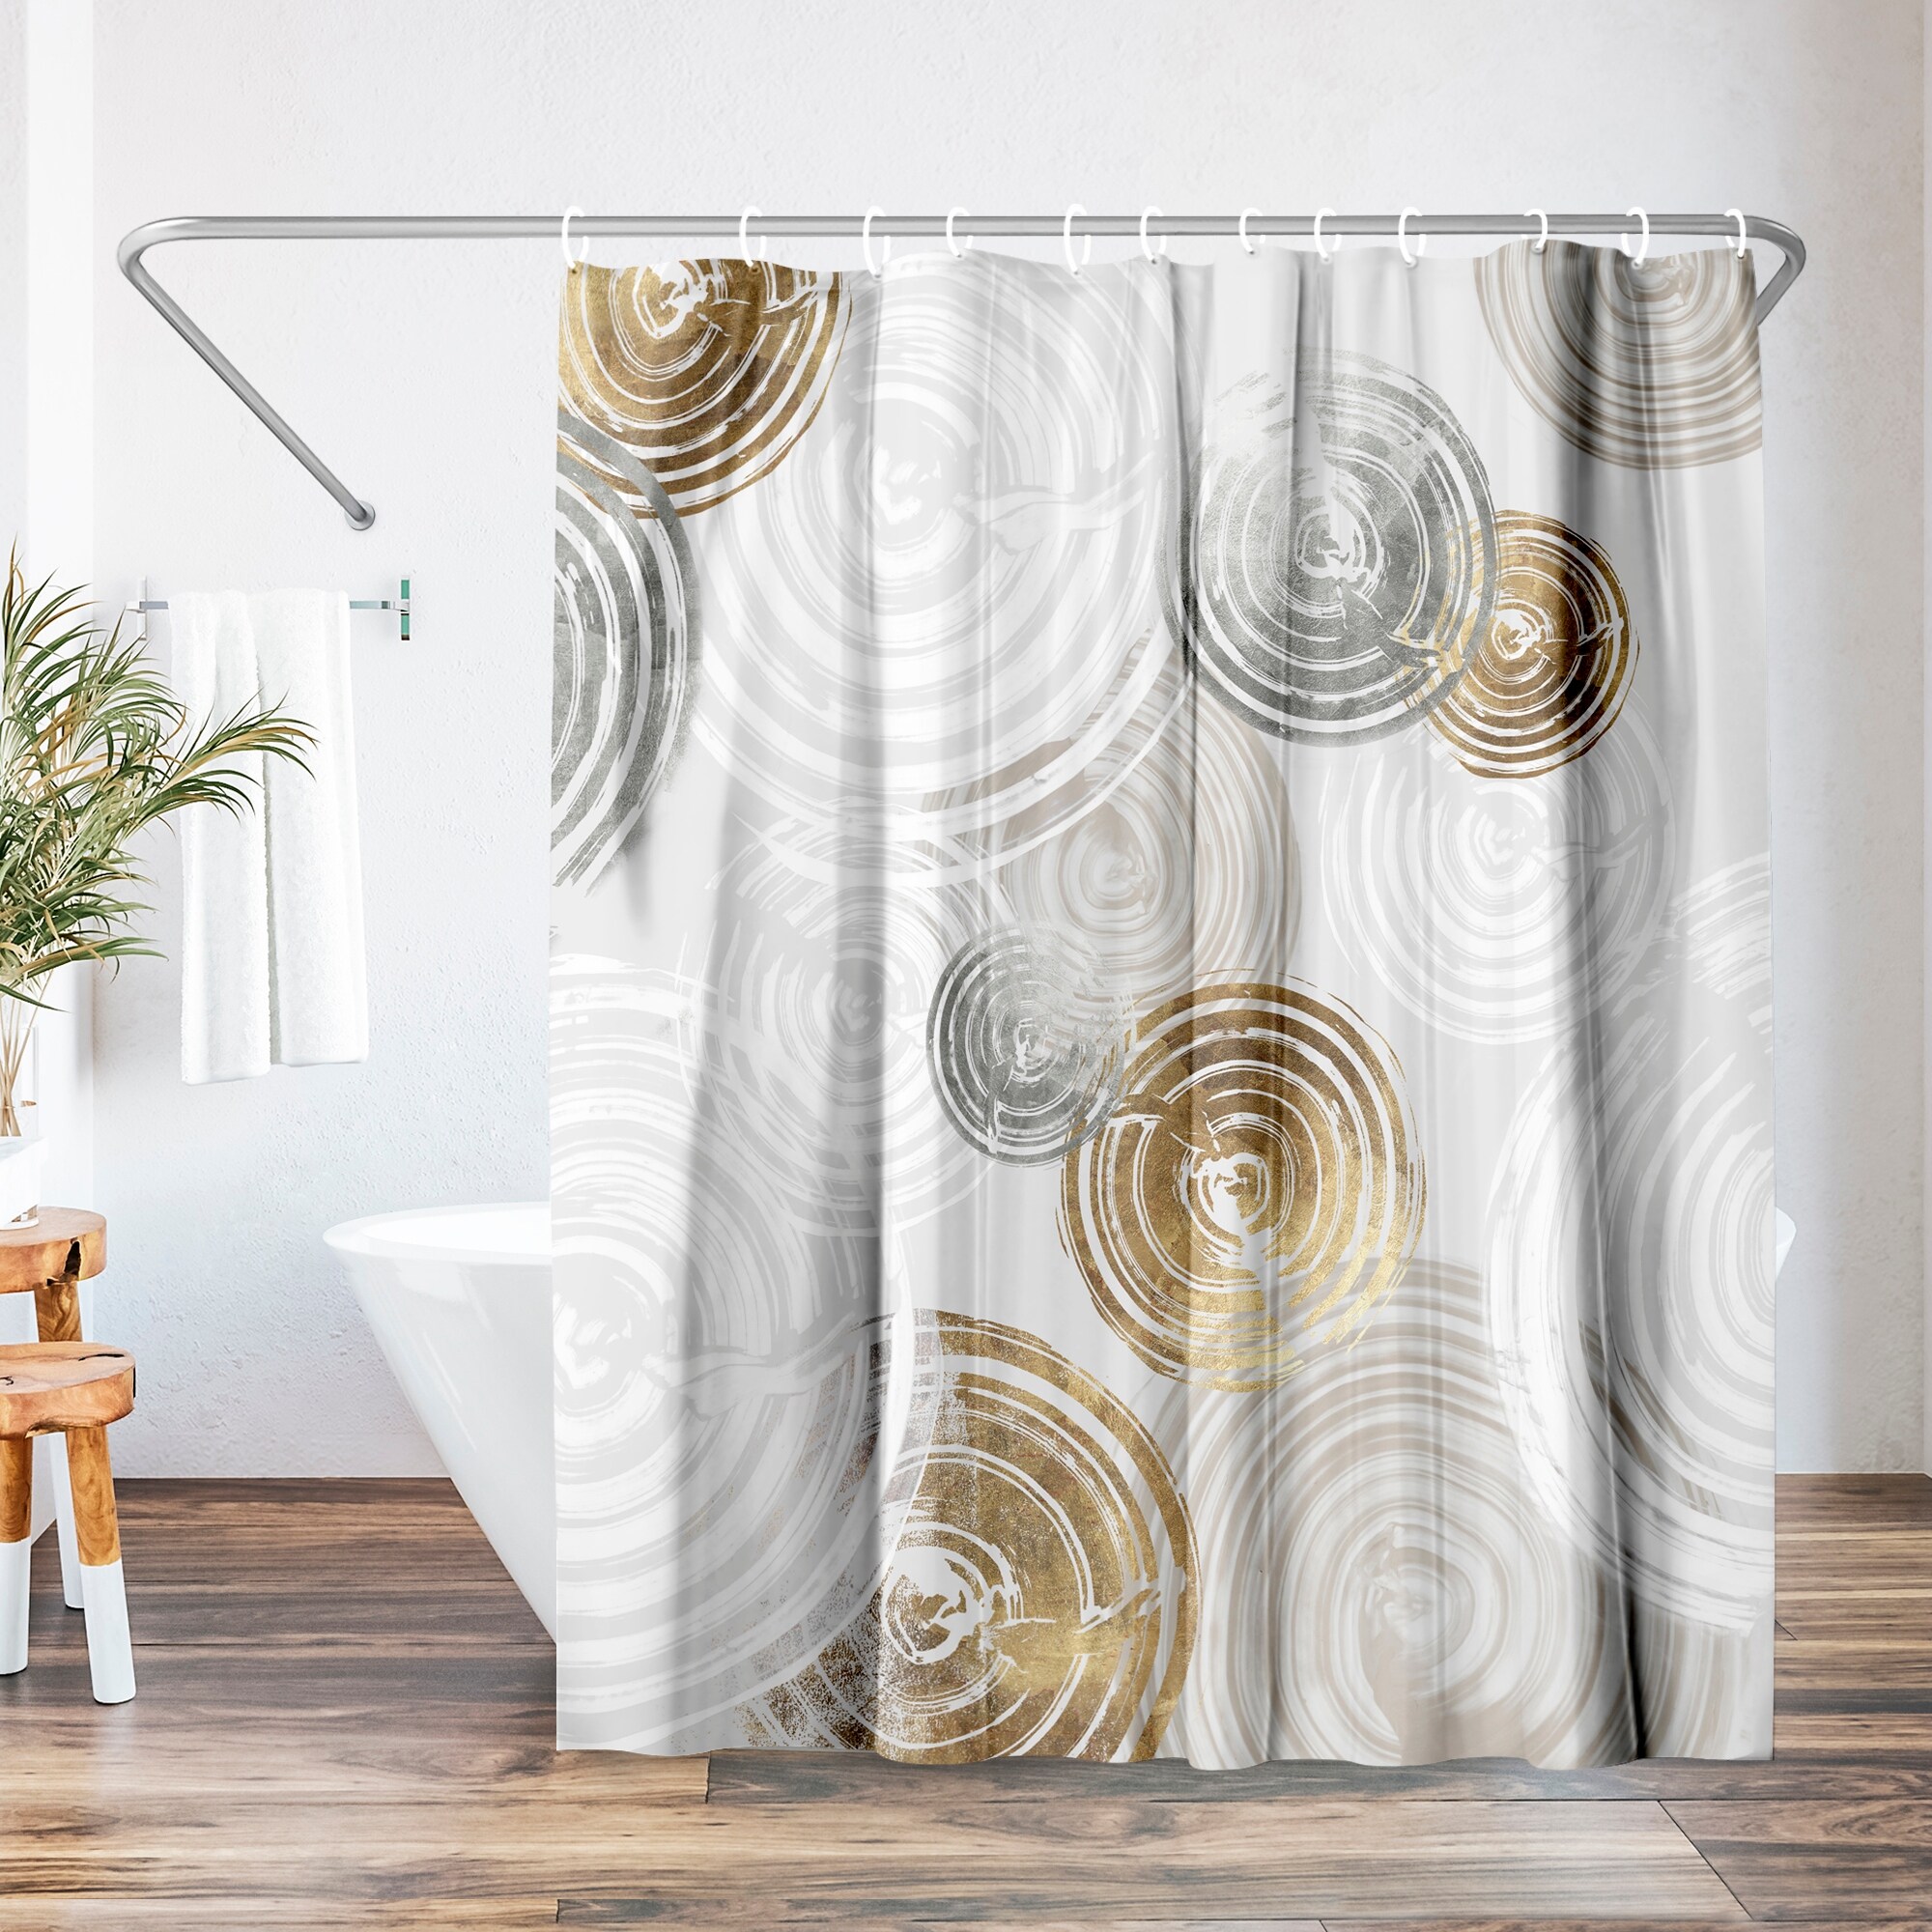 Americanflat Shower Curtains - Bed Bath & Beyond